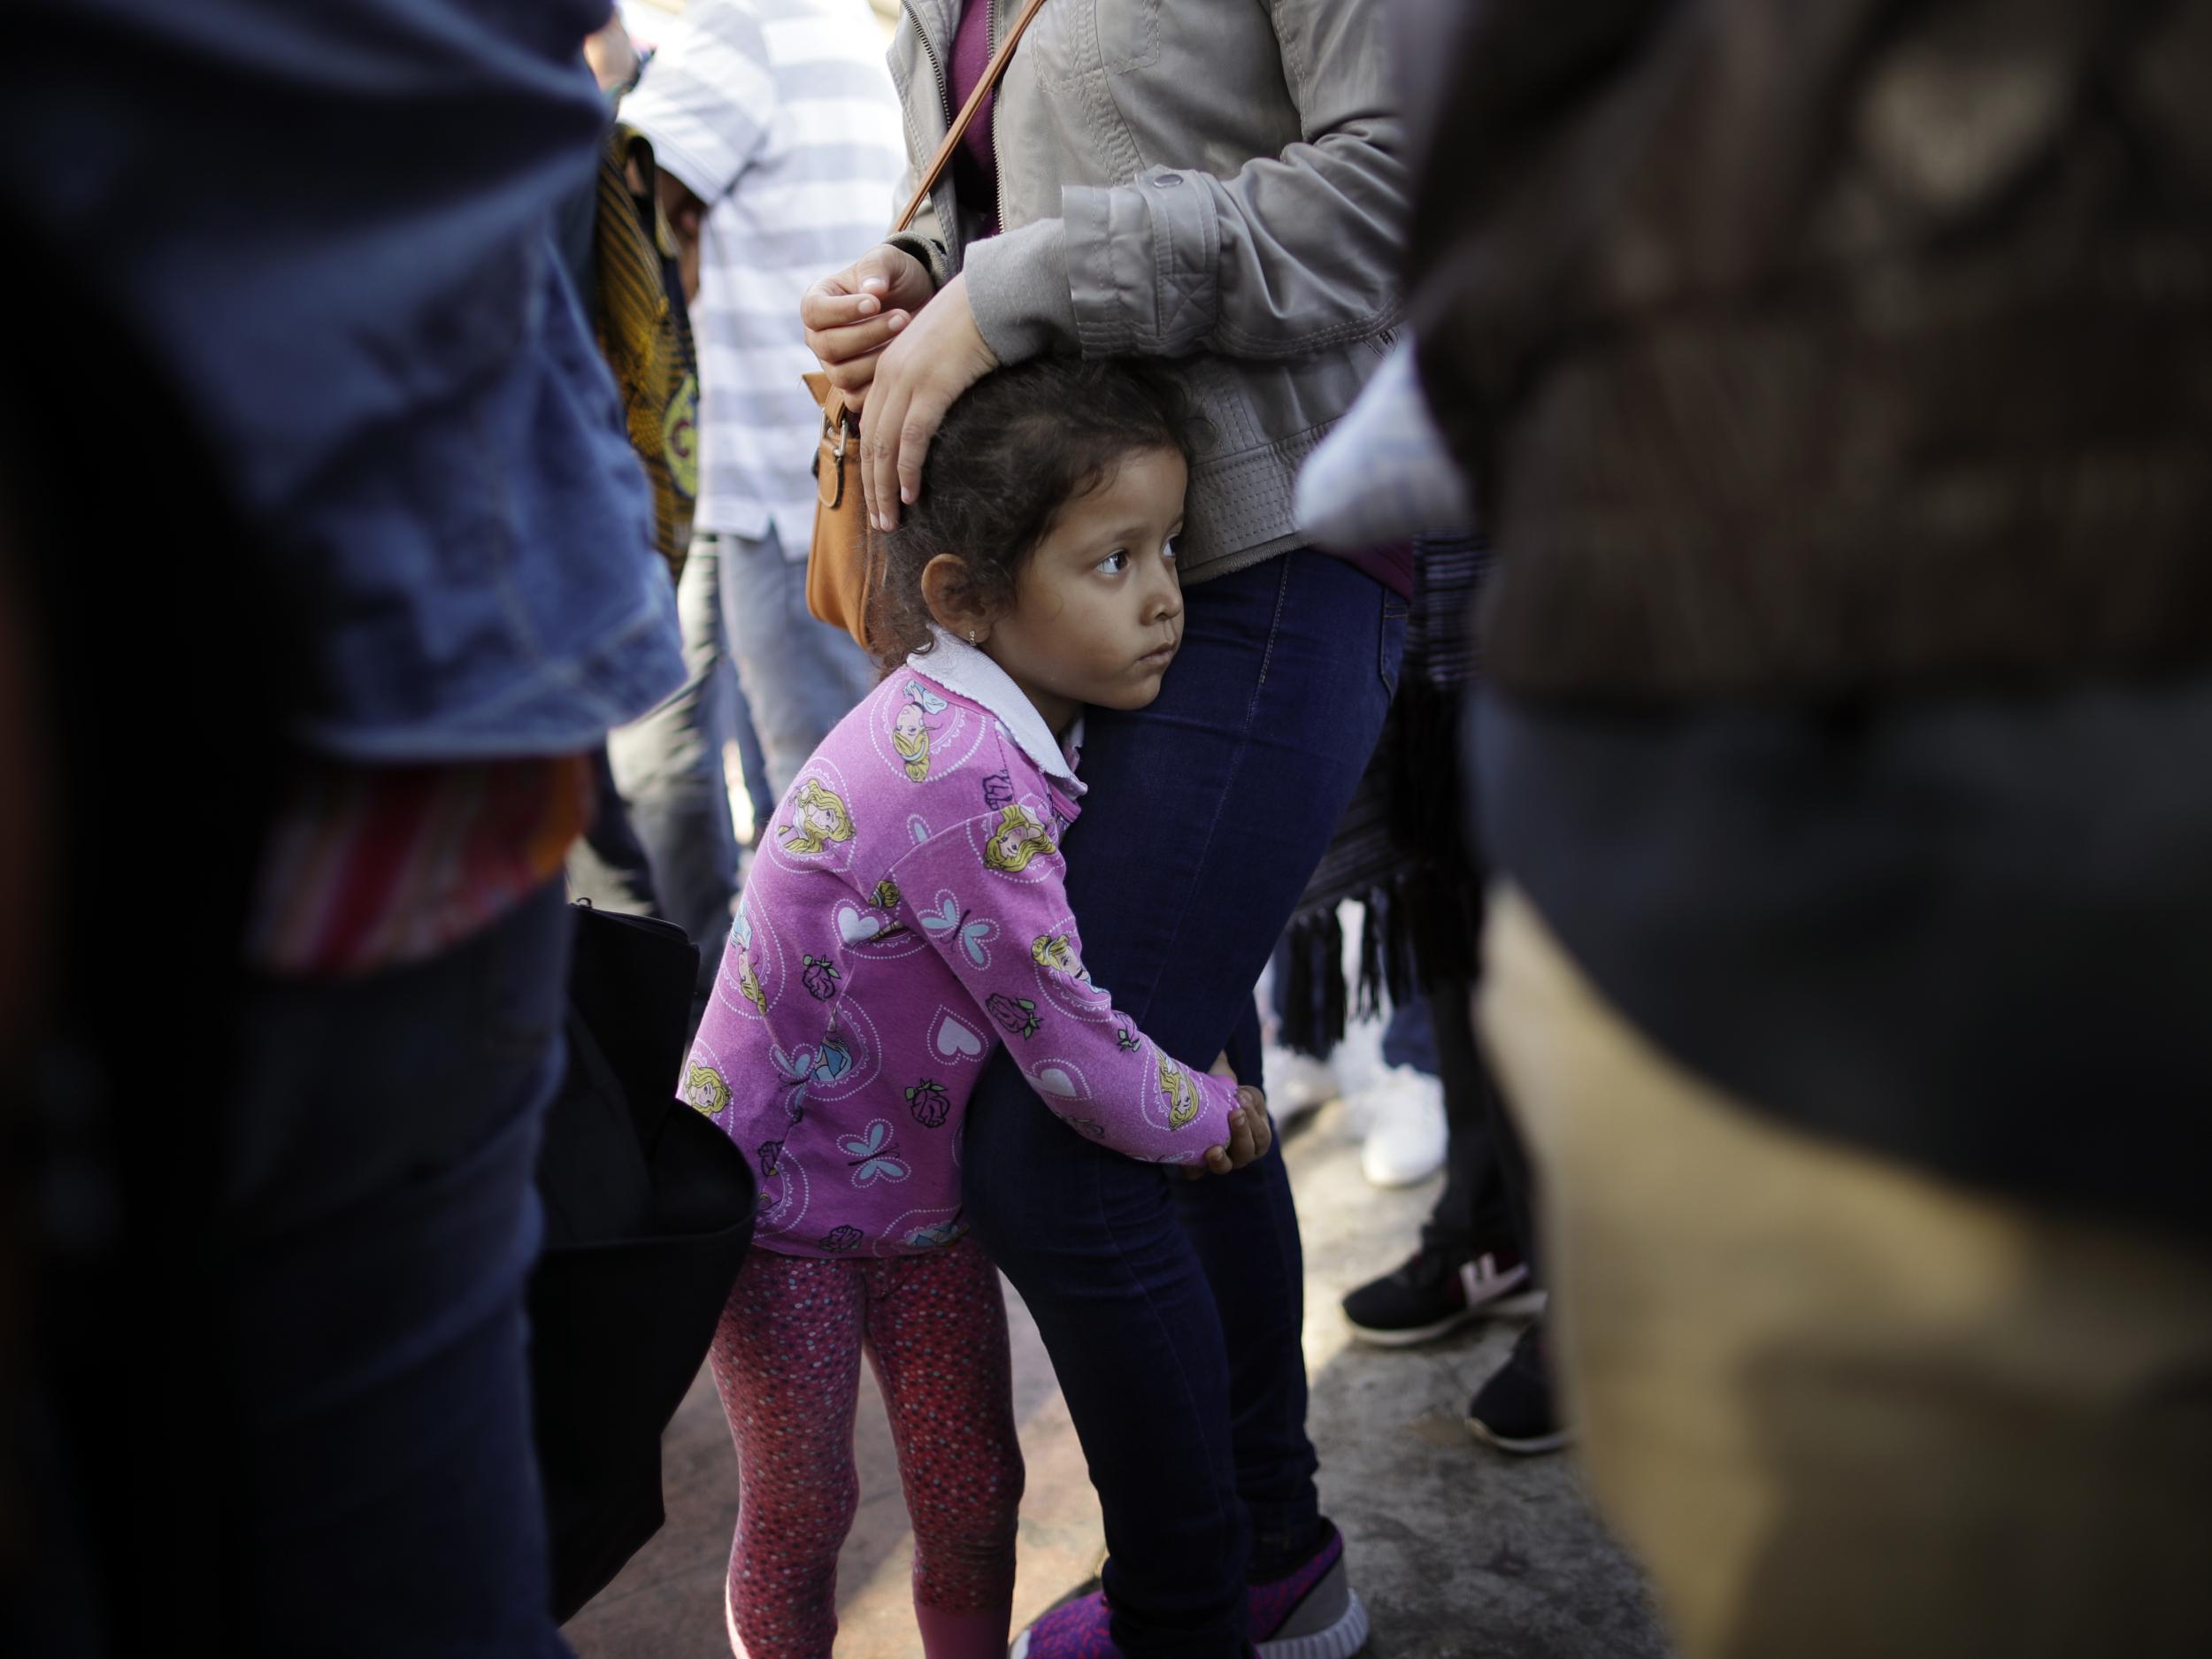 Hundreds of immigrant children were flown thousands of miles from the US’s southern border where they were separated from their parents to New York